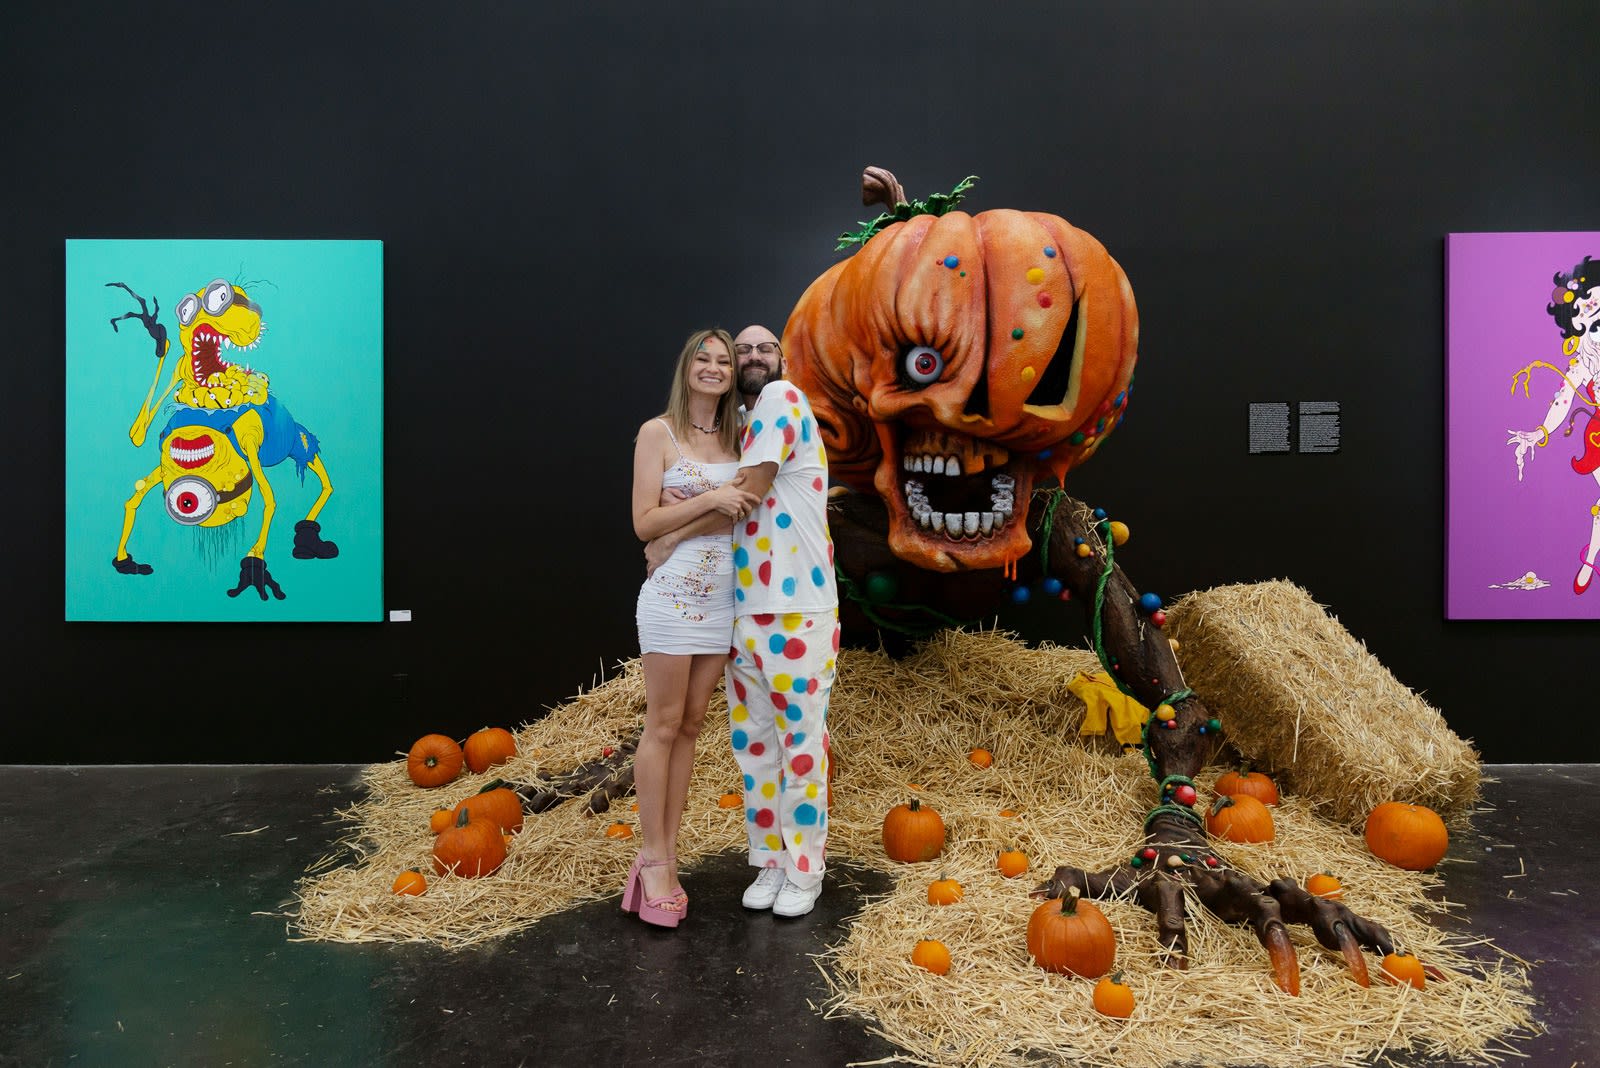 Alex Pardee and Chloe Rice hugging in front of Giant Pumpkin installation